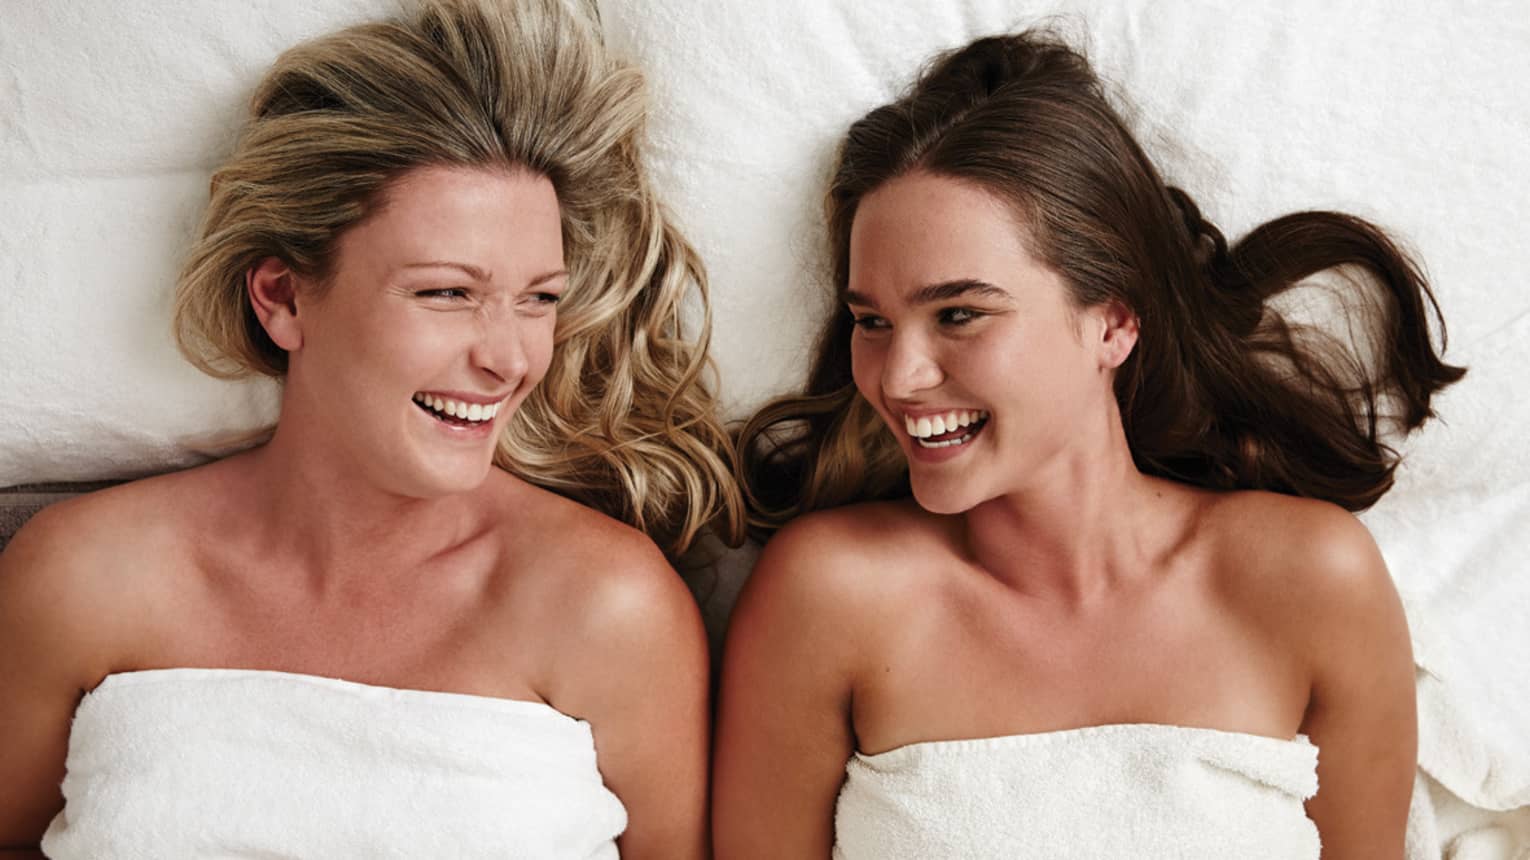 Two laughing women wearing white towels lie on massage table in spa